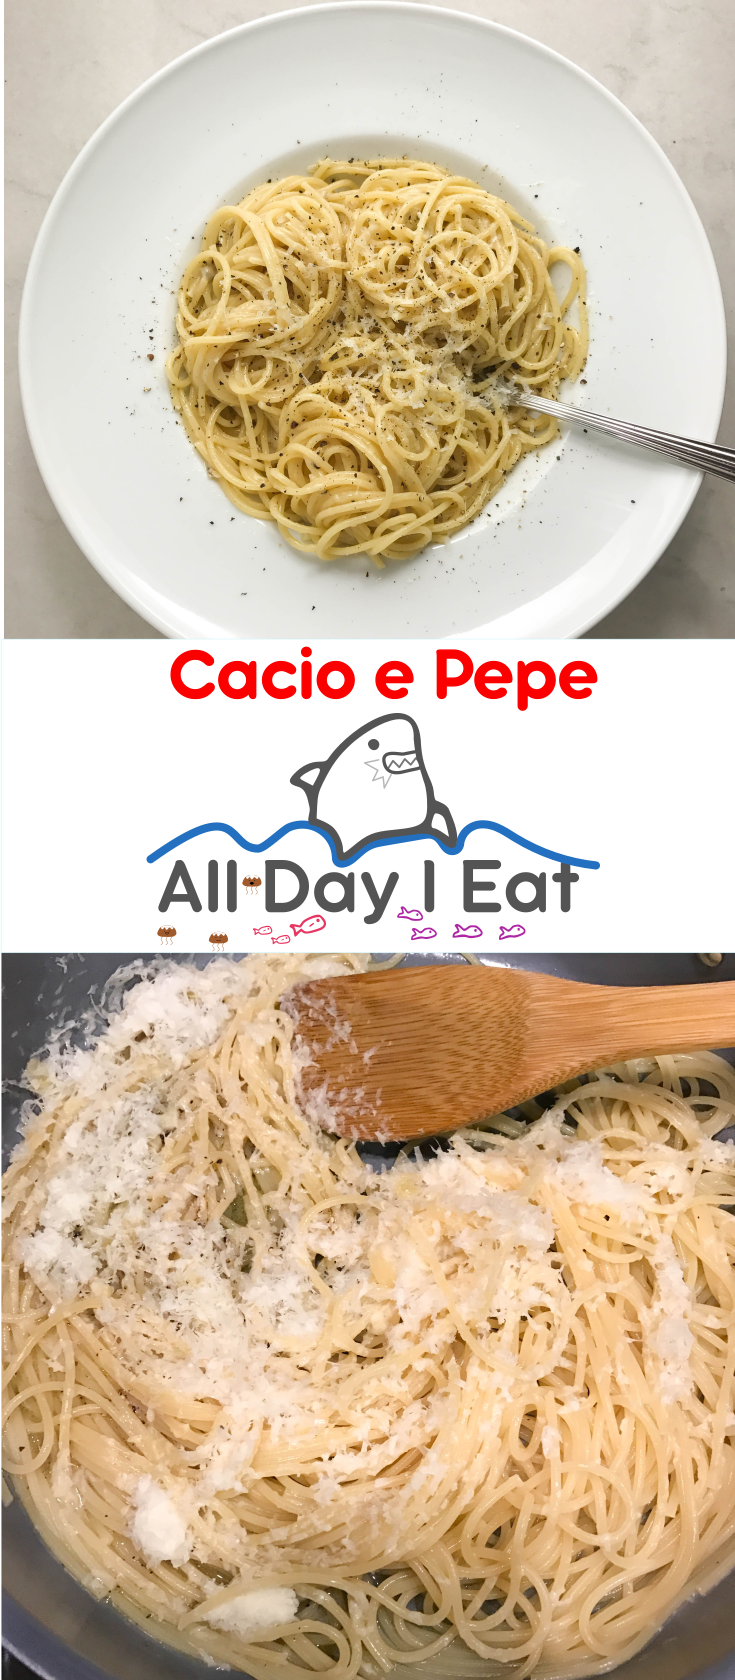 Cacio e Pepe (Roman pasta with Pecorino cheese and pepper). Easy and edible in <20 minutes! With fresh cheese and fresh pepper this makes a killer dinner! | www.alldayieat.com